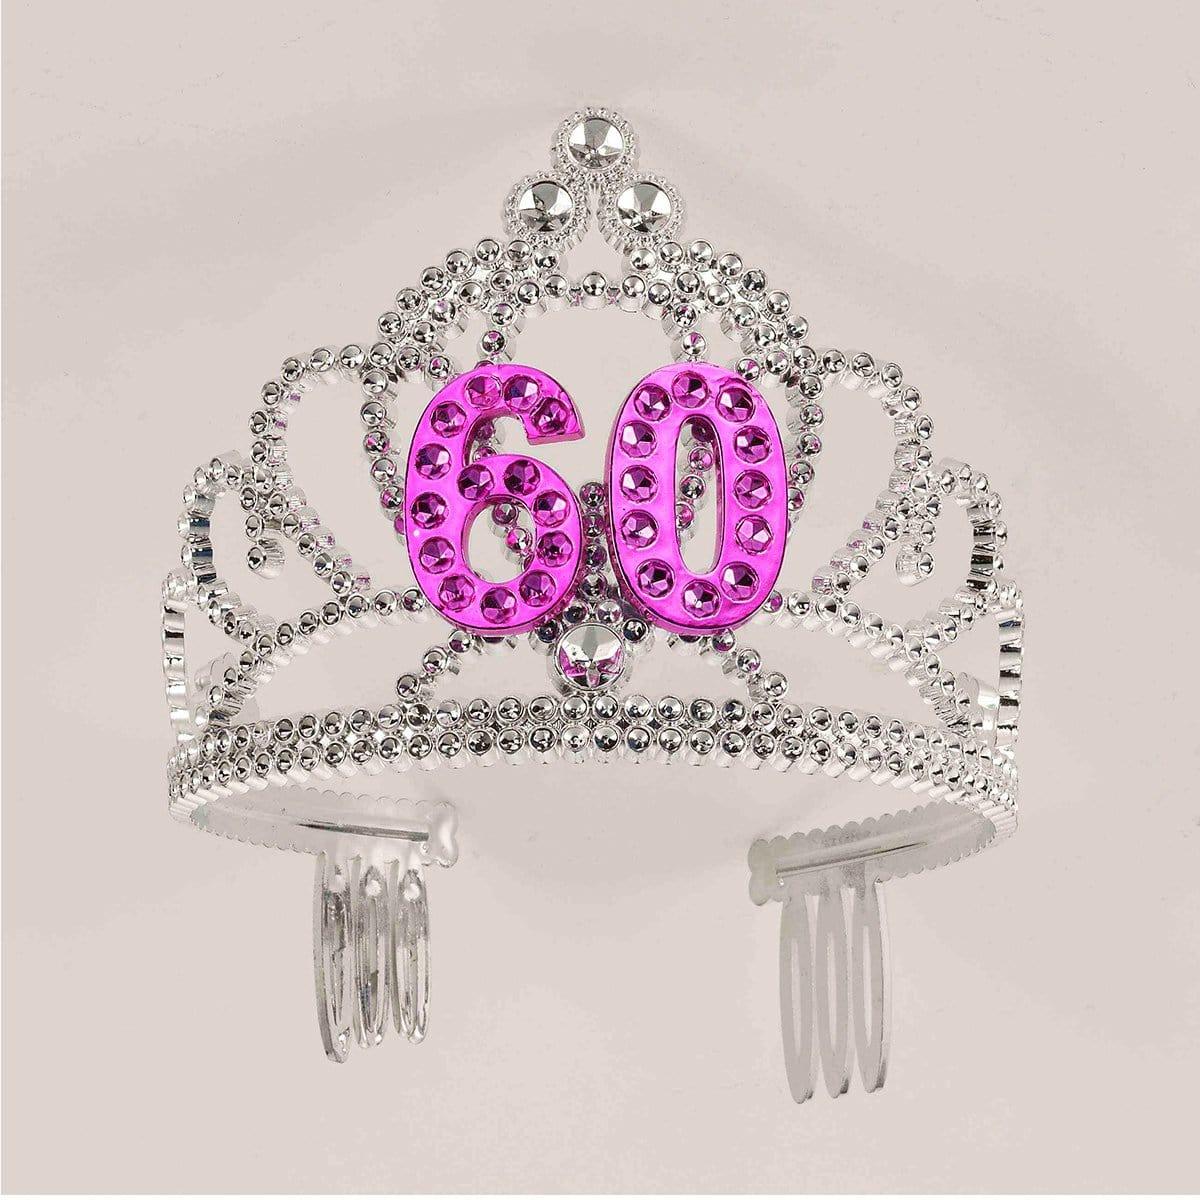 Buy Age Specific Birthday Plastic Tiara #60 sold at Party Expert